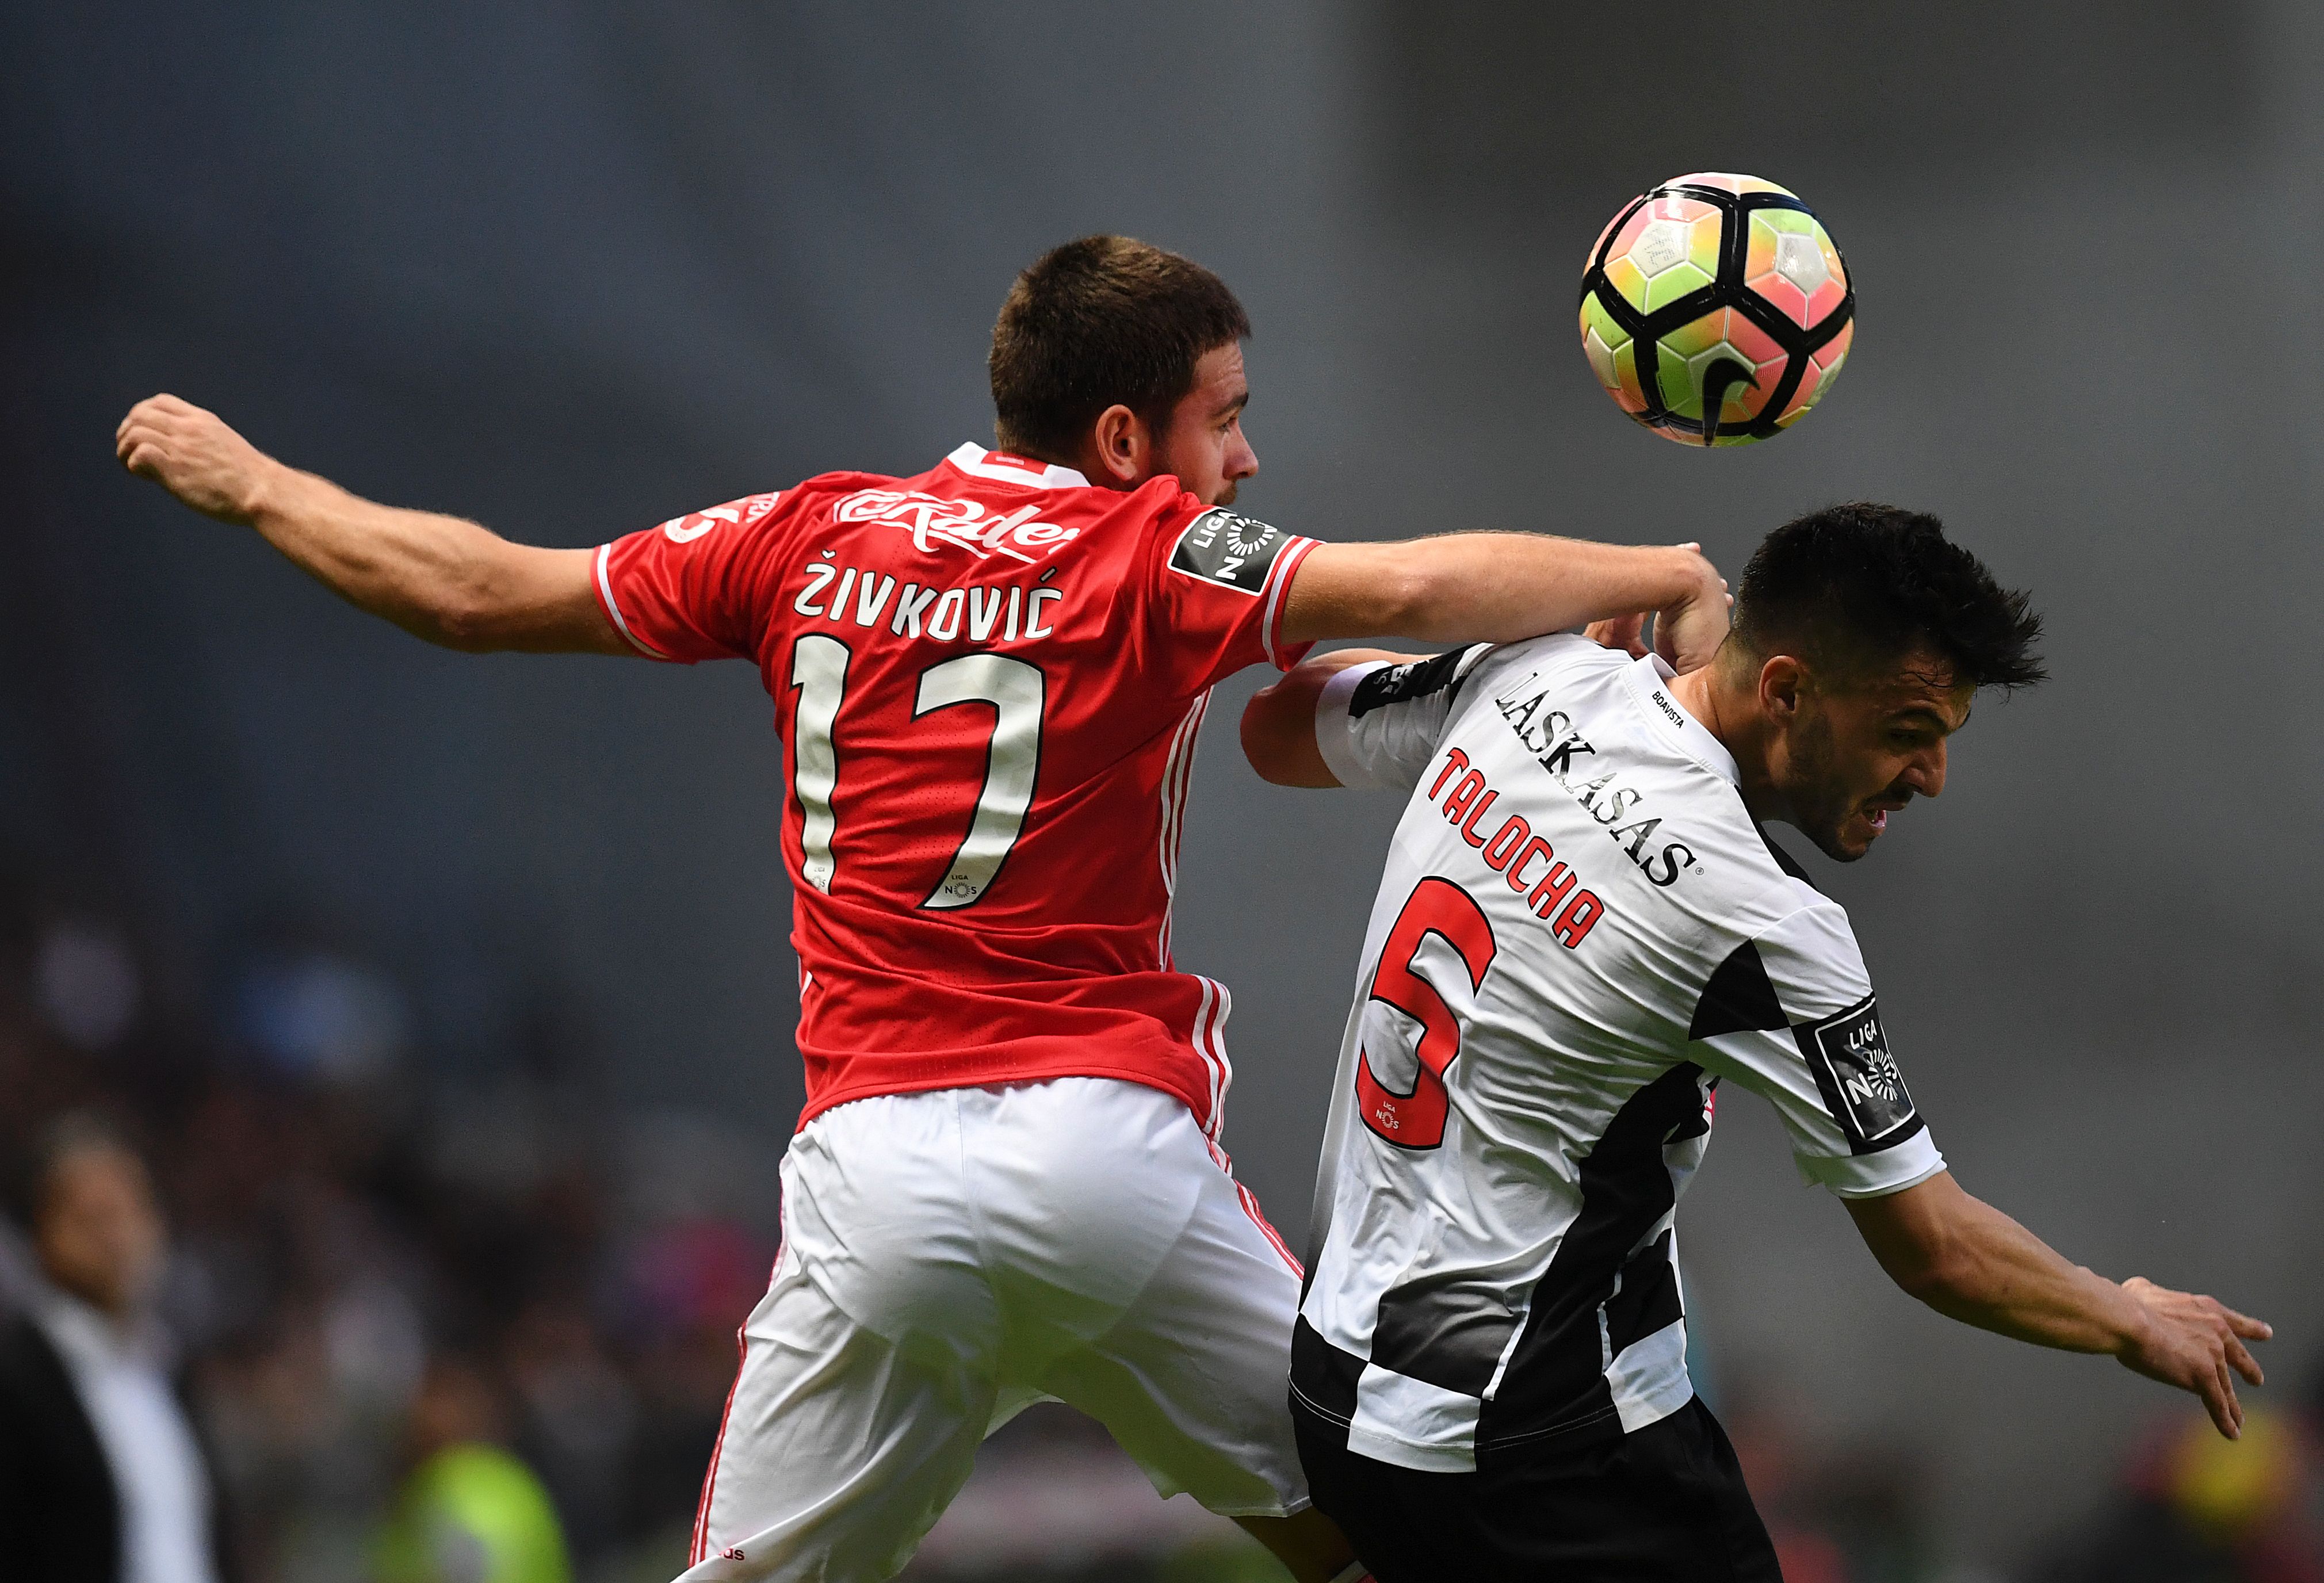 Benfica's Croatian forward Zivkovic (L) vies with Boavista's defender Talocha during the Portuguese league football match Boavista FC vs SL Benfica  at the Estadio do Bessa Seculo XXI in Porto on May 20, 2017. / AFP PHOTO / FRANCISCO LEONG        (Photo credit should read FRANCISCO LEONG/AFP/Getty Images)